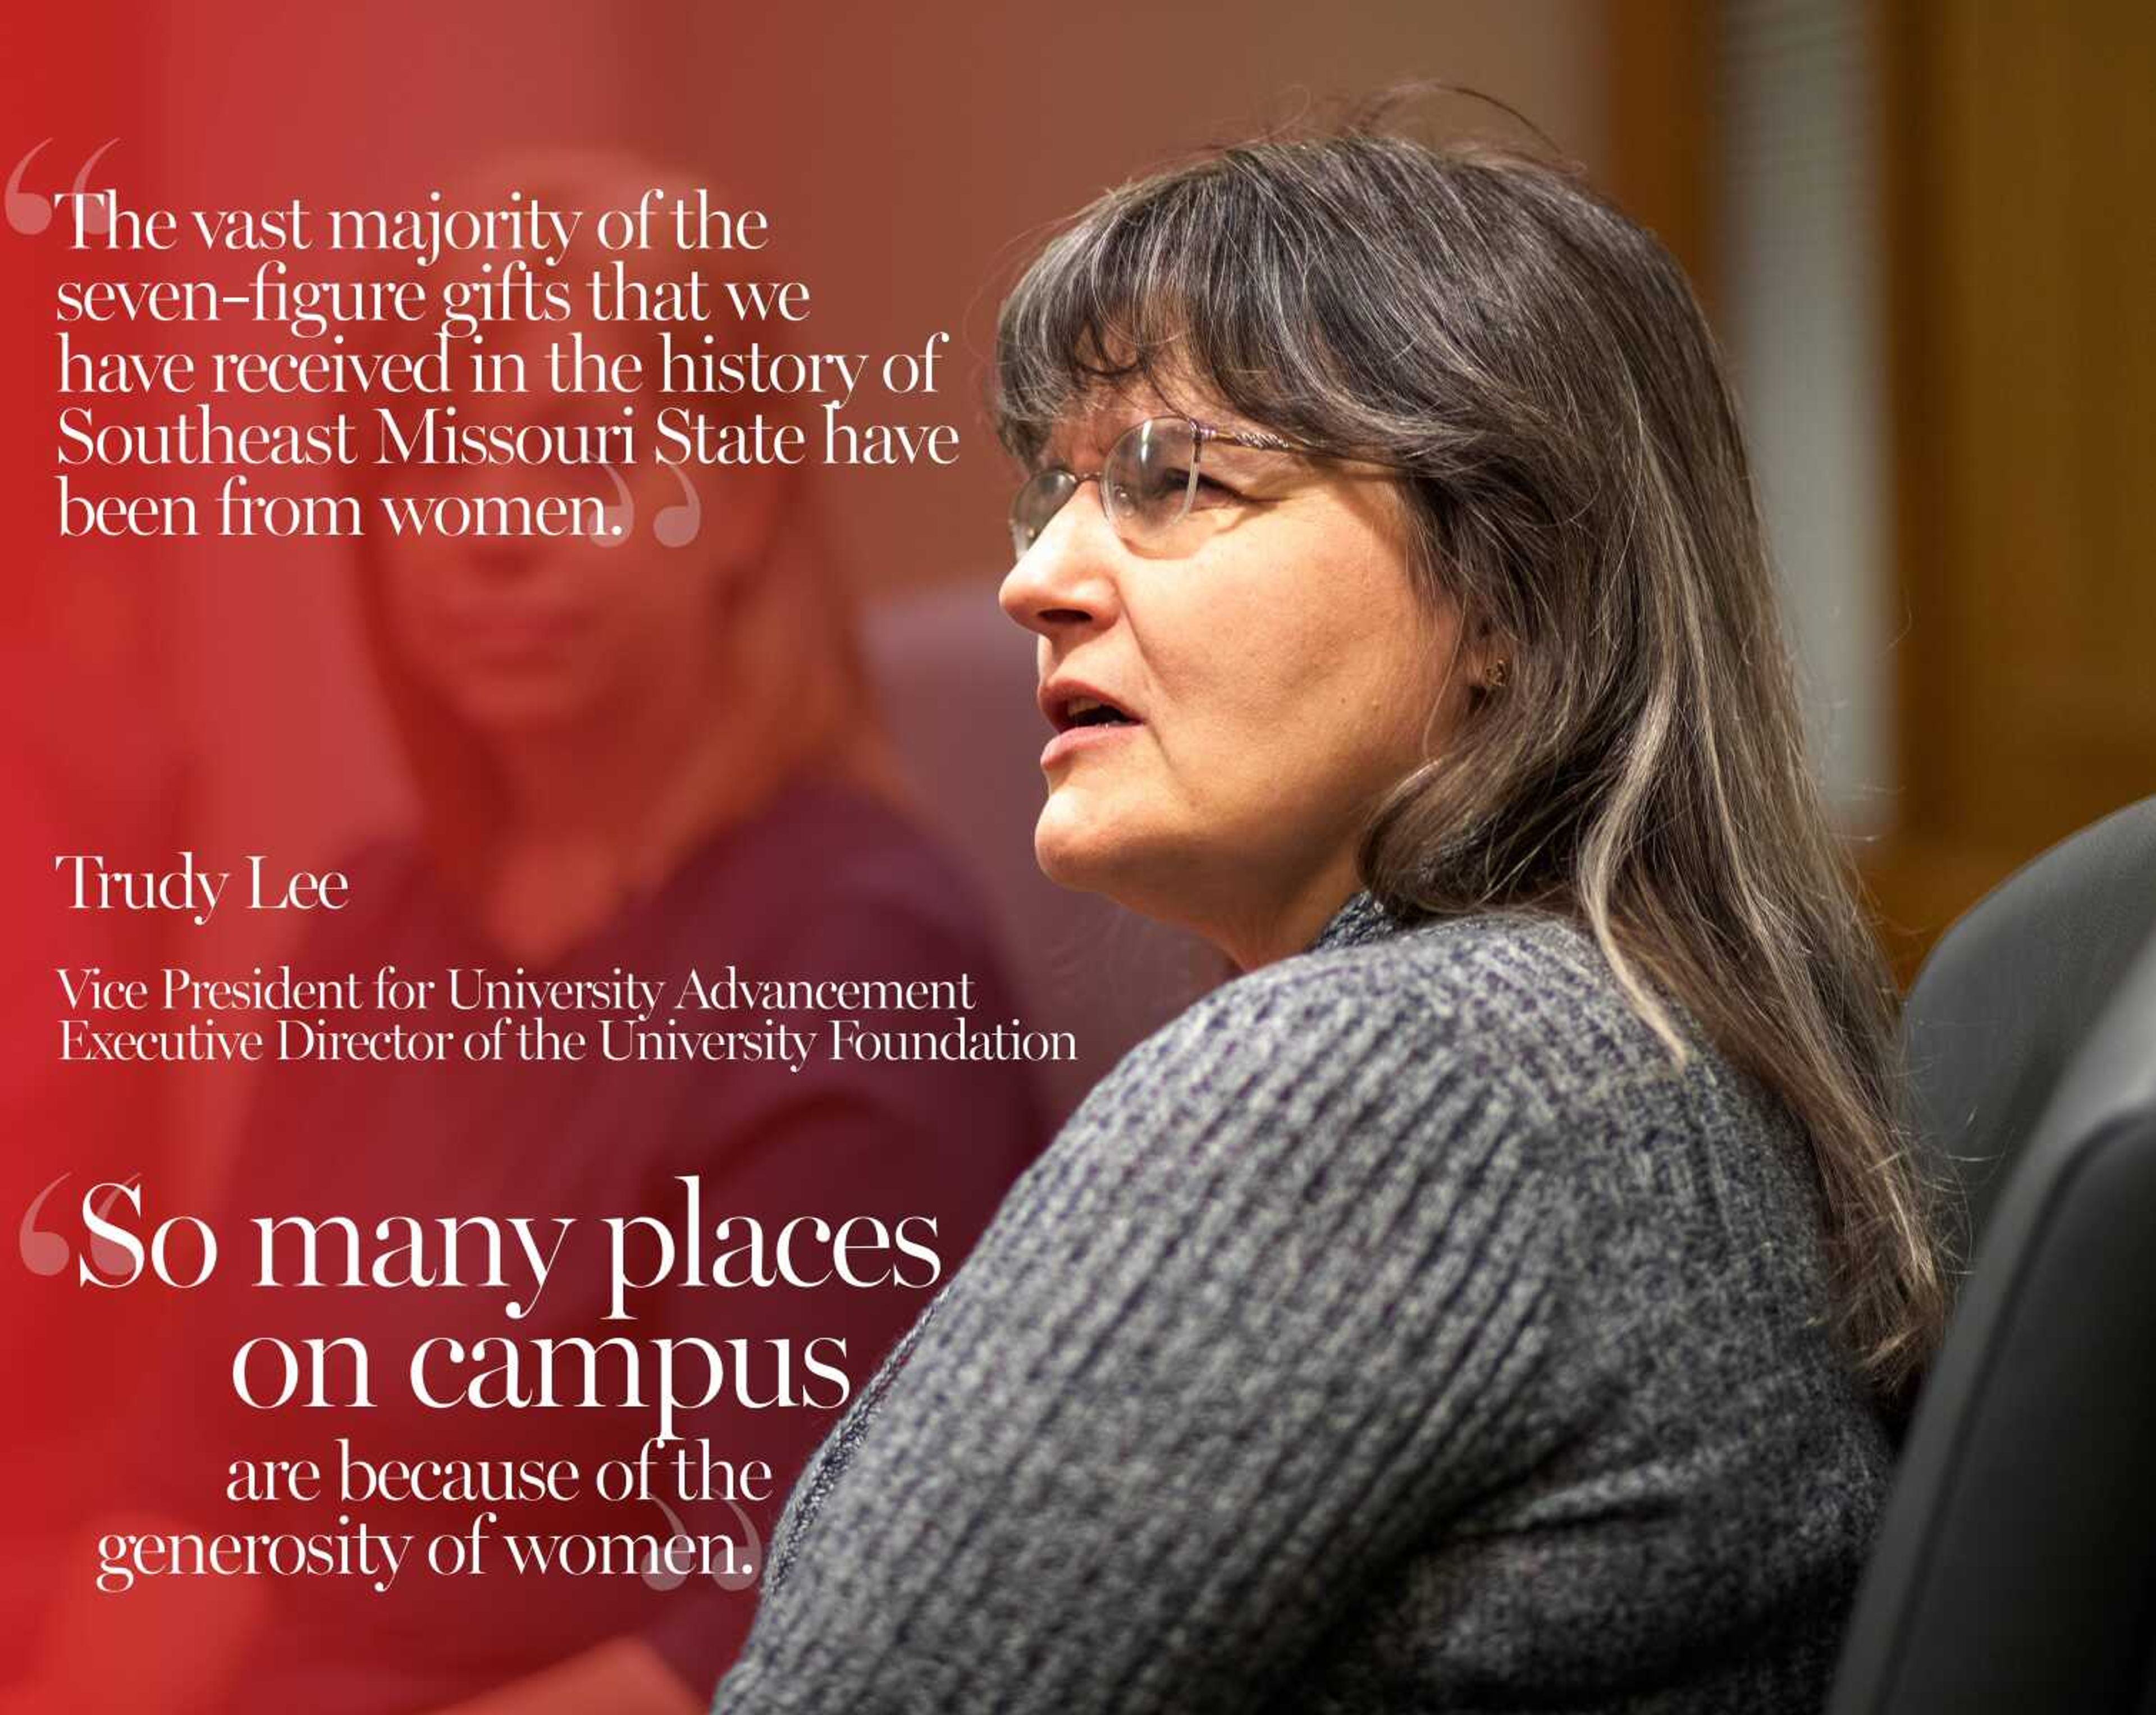 Trudy Lee, Vice President for University Advancement Executive Director of the University Foundation  